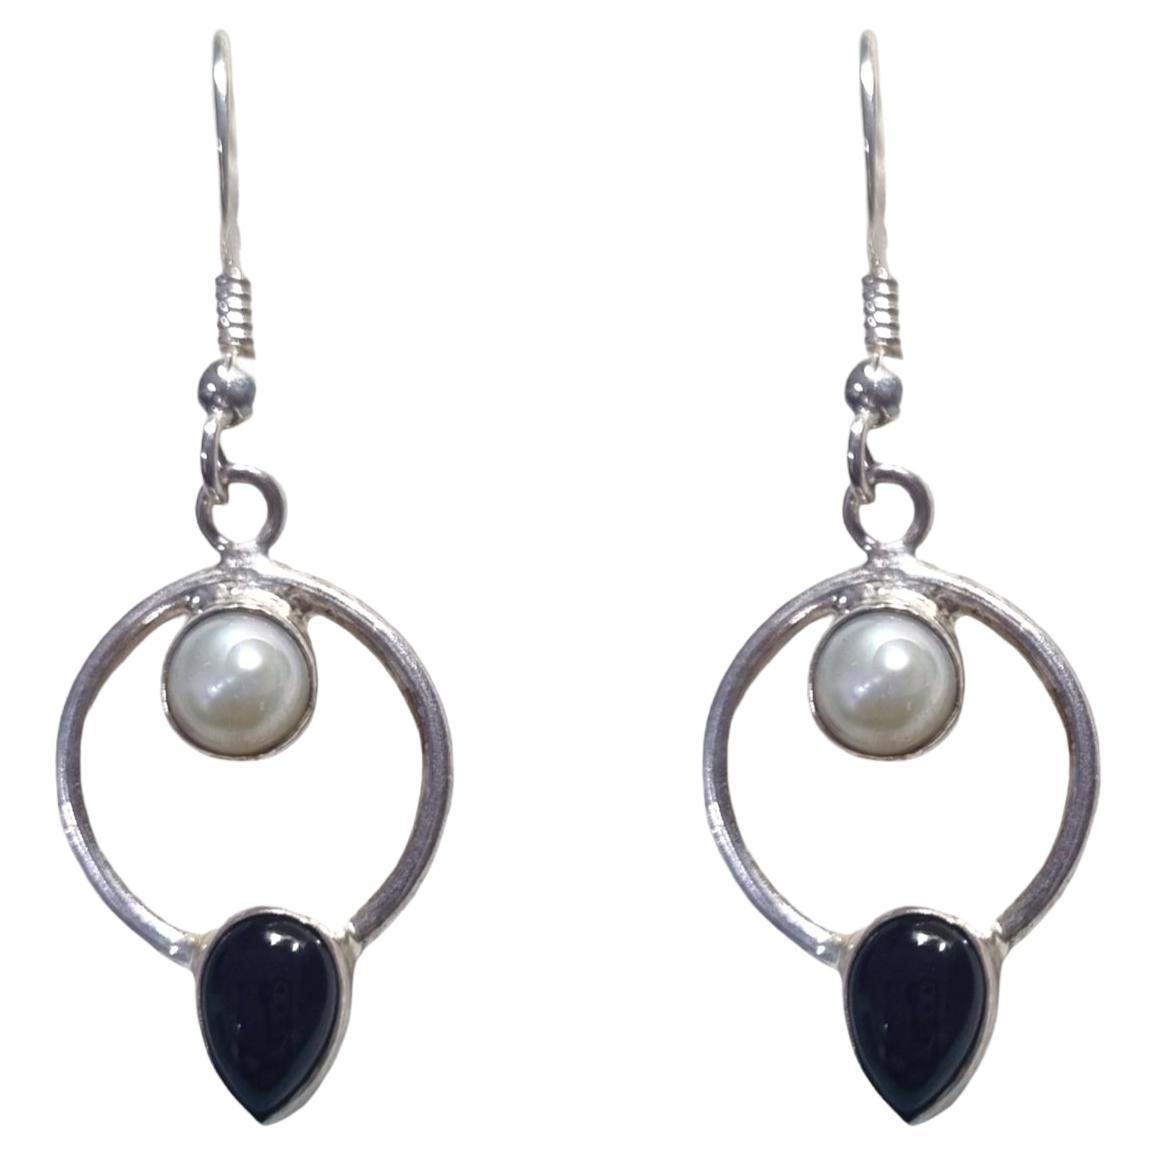 Black Onyx and Pearls Earrings For Sale